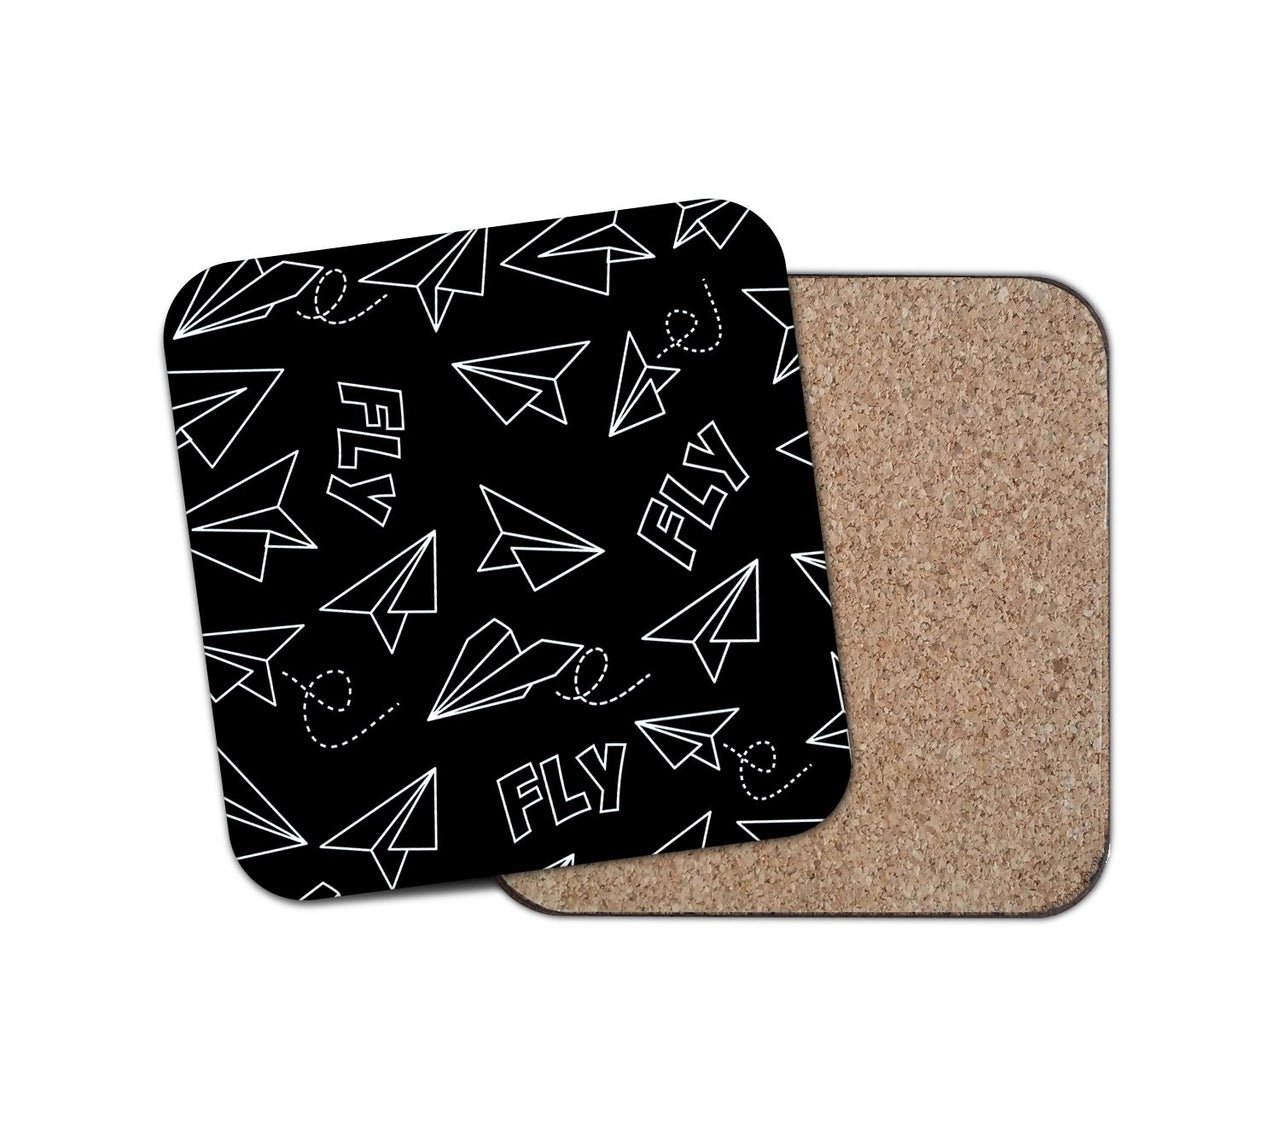 Paper Airplane & Fly Black Designed Coasters